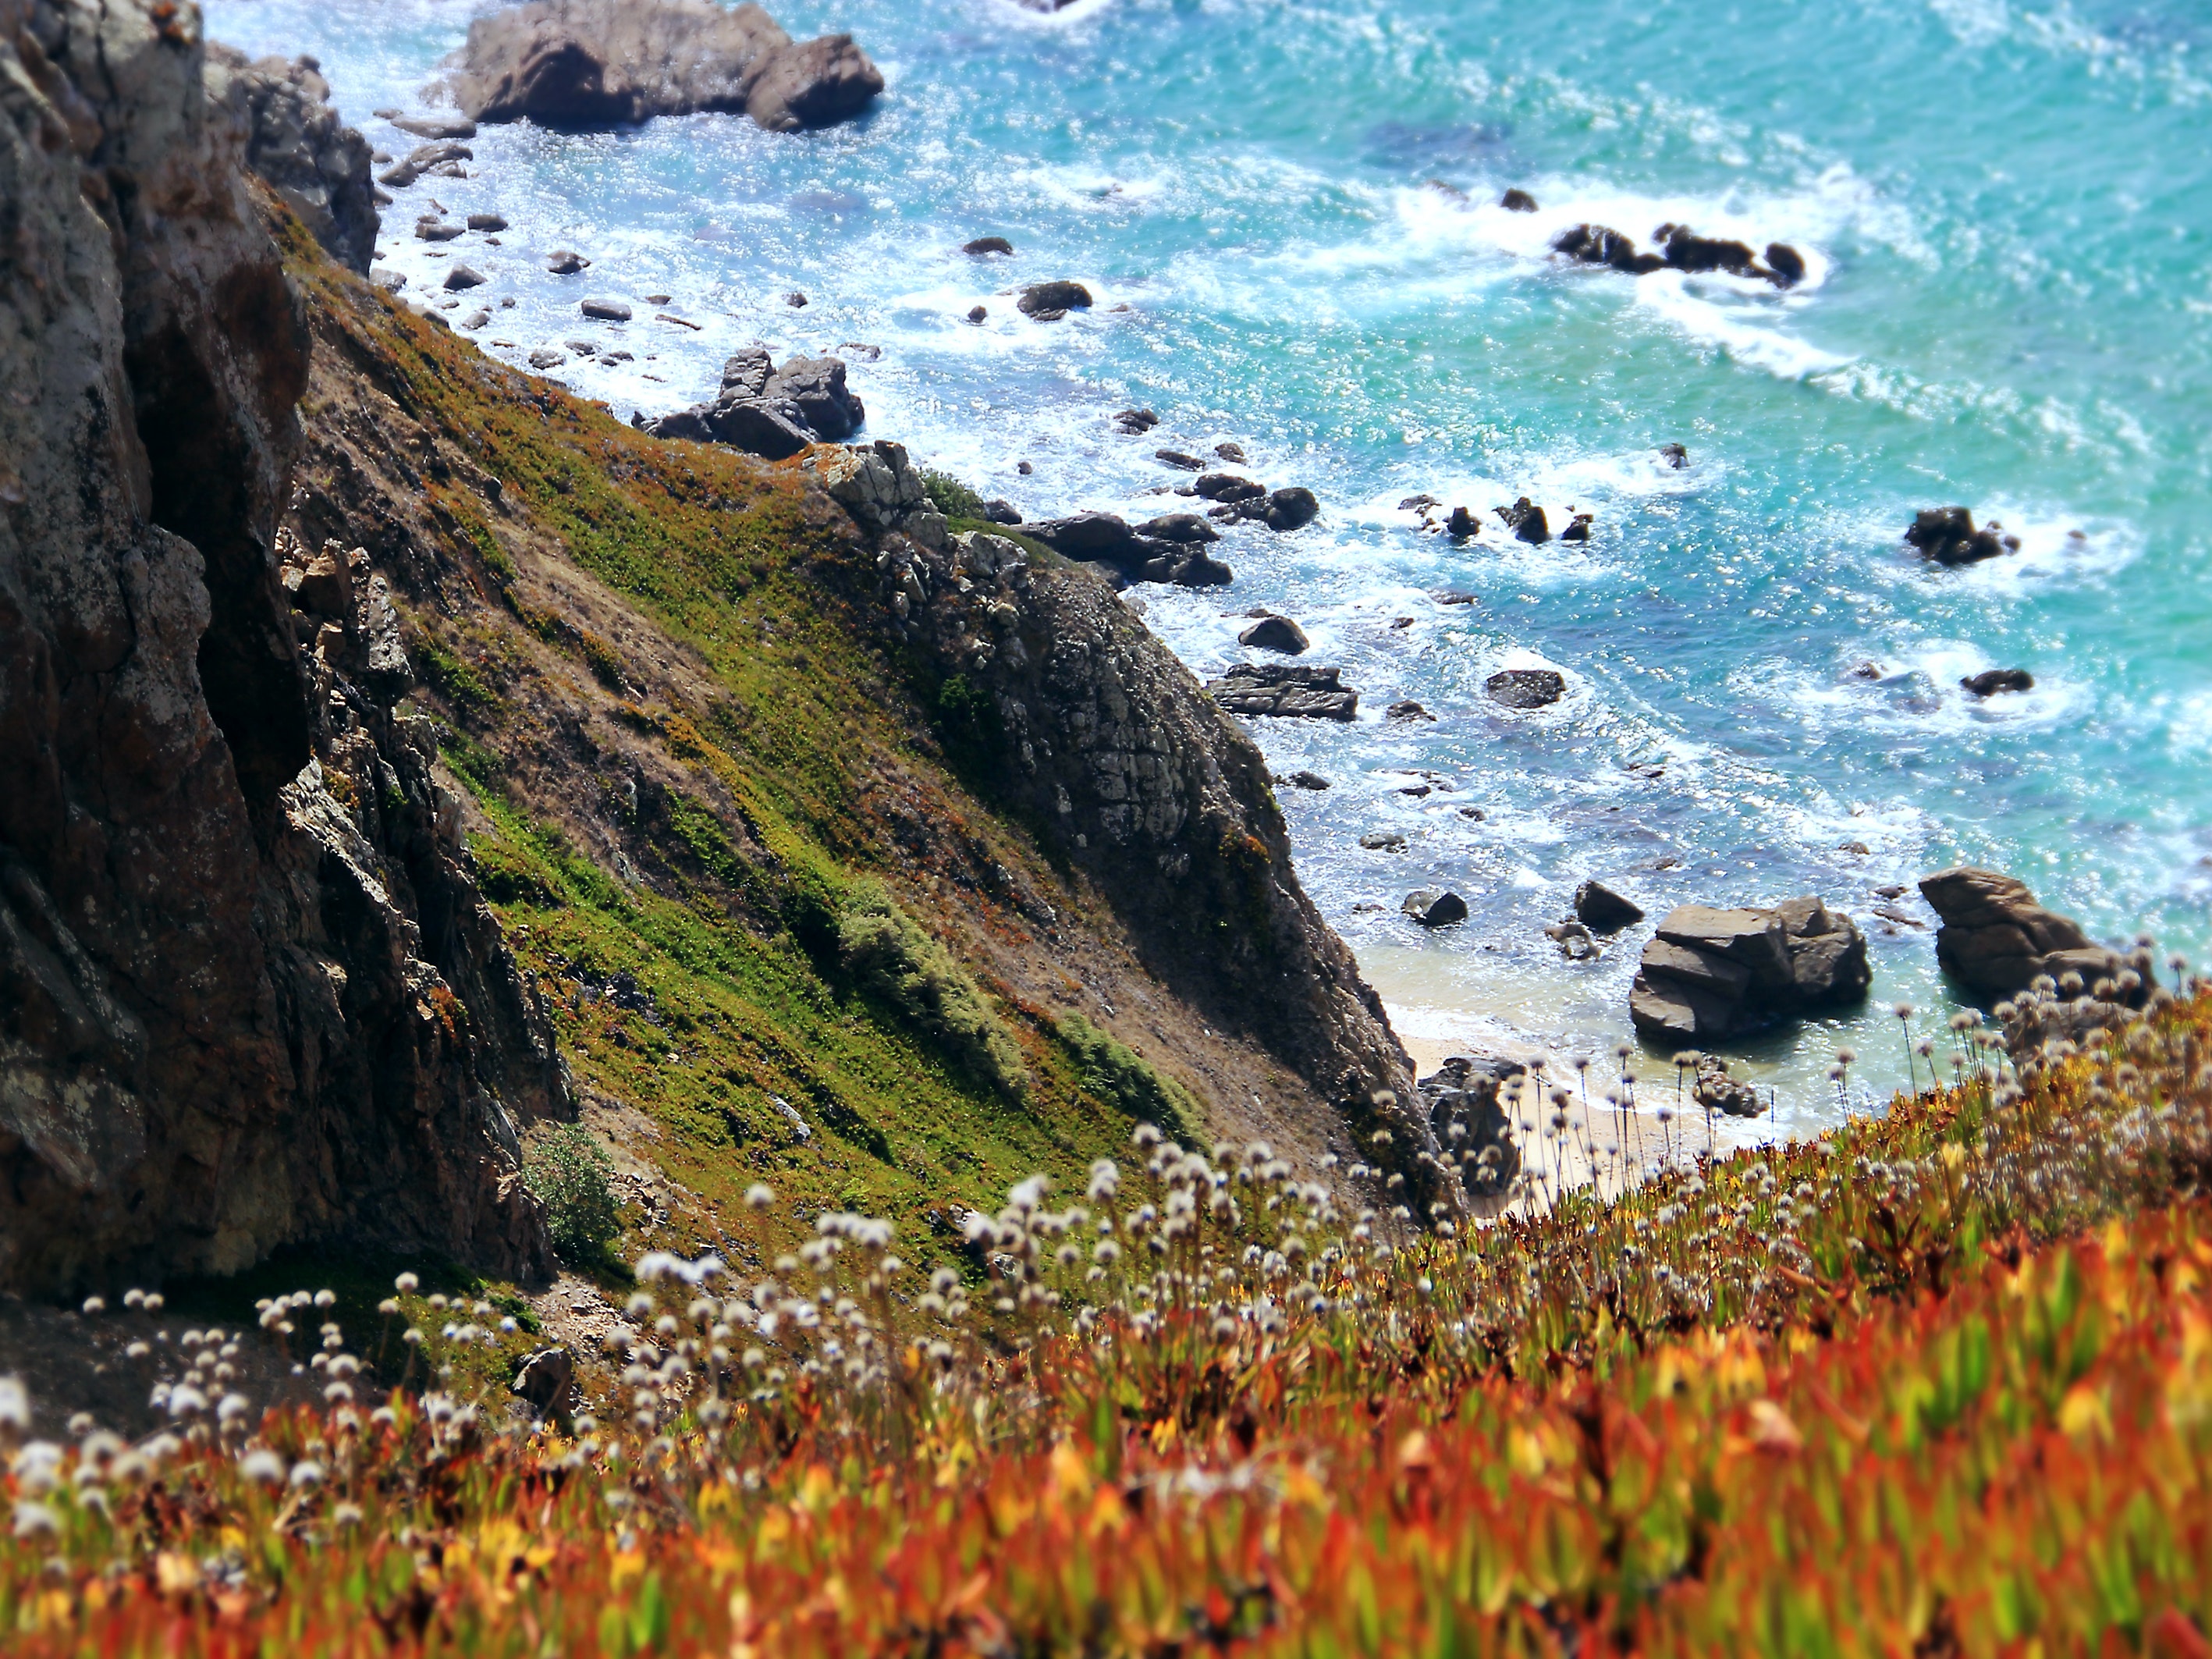 Photography of orange-and-yellow petaled flowers on cliff near body of water at daytime